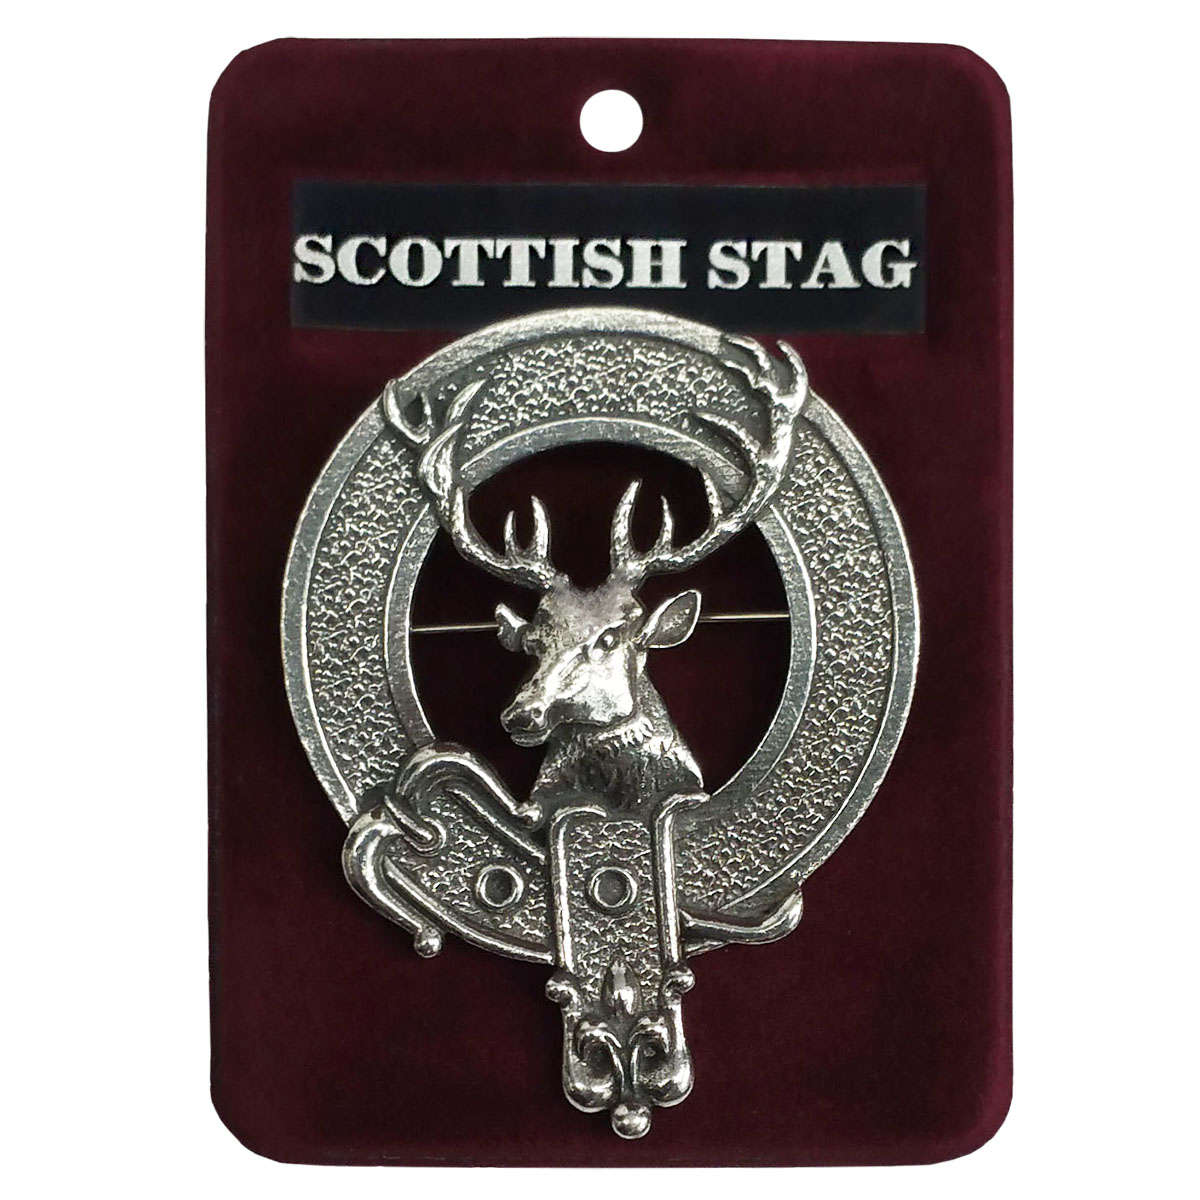 A Scottish Stag Cap Badge/Brooch with a deer on it.